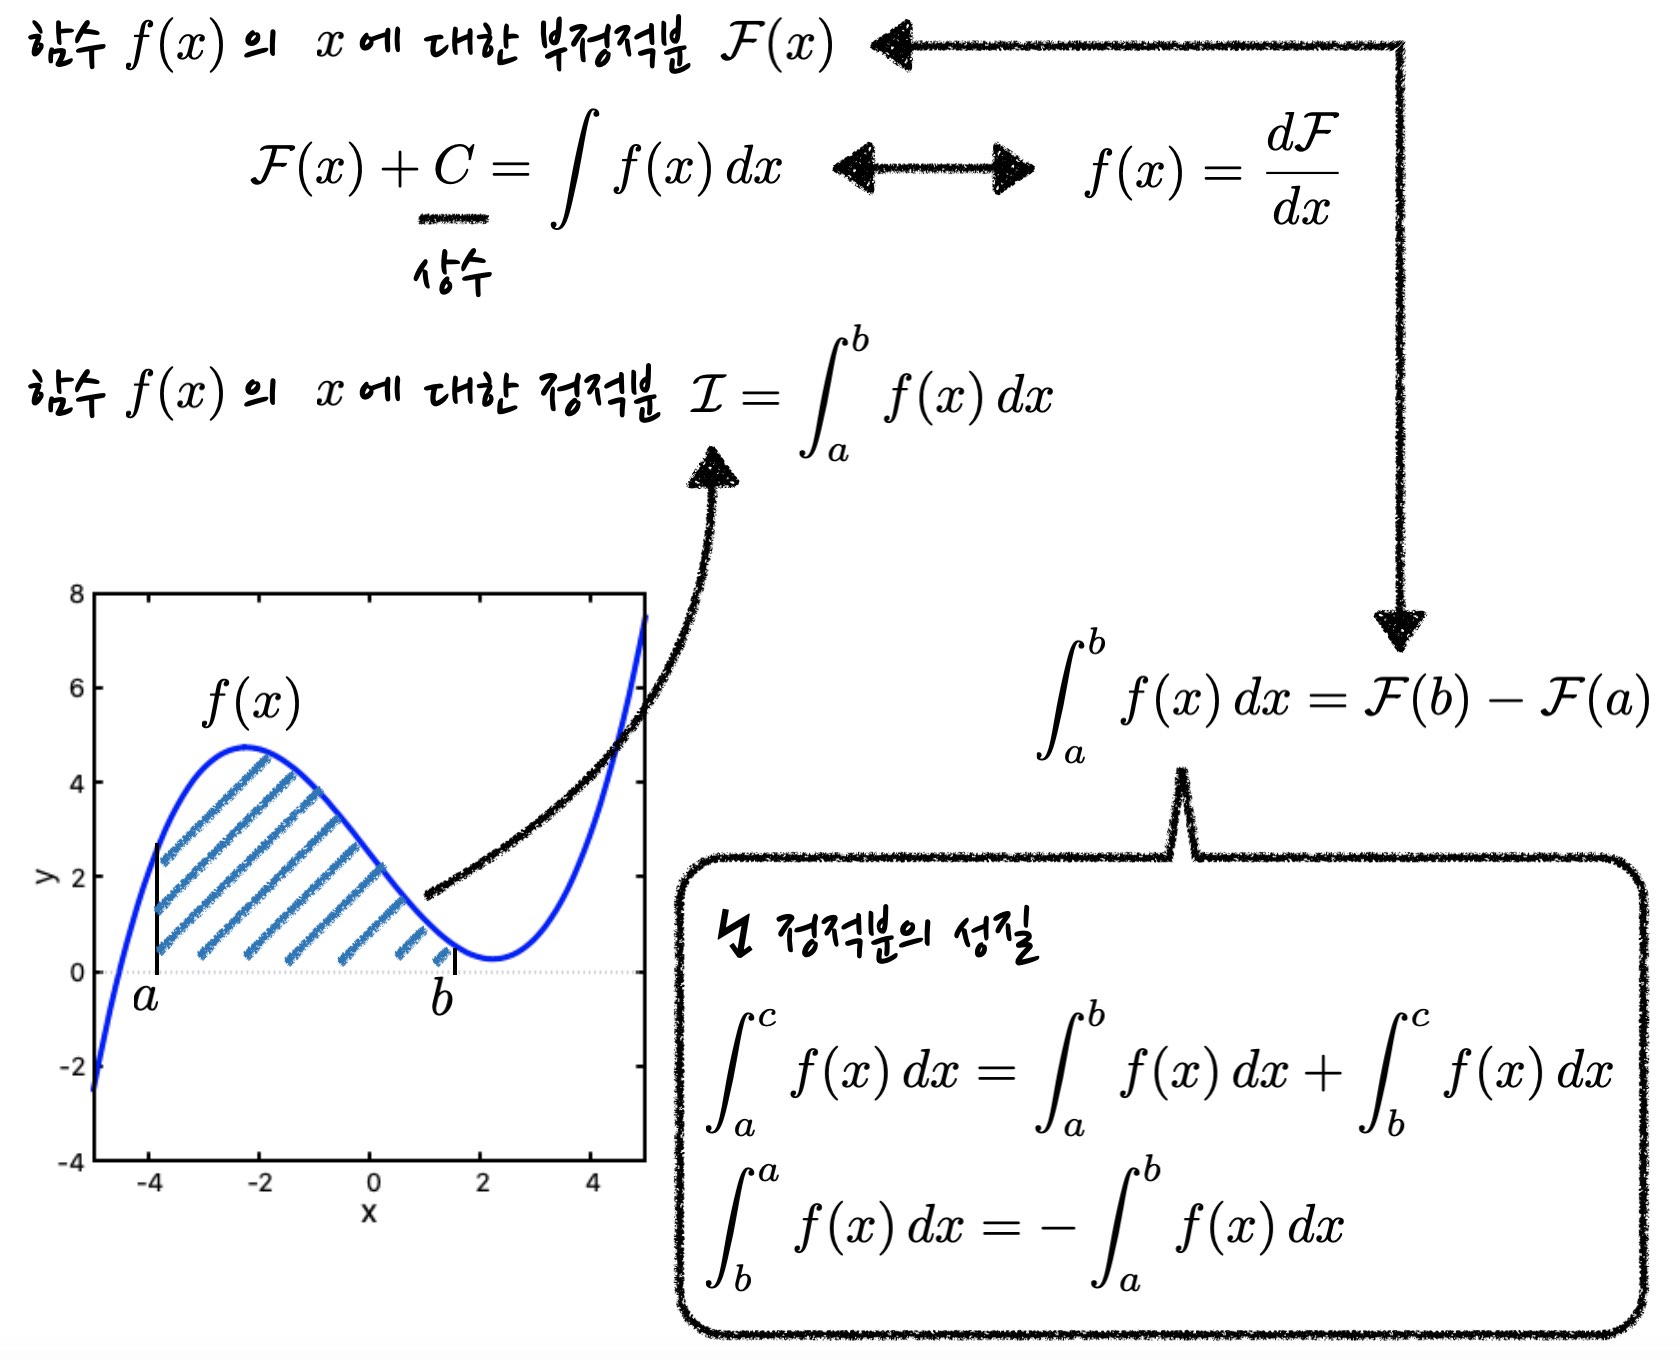 equations for definition of indefinite and definite integrations. Definite integration also has geometric interpretation as an area spanned by the function and horizontal axis.